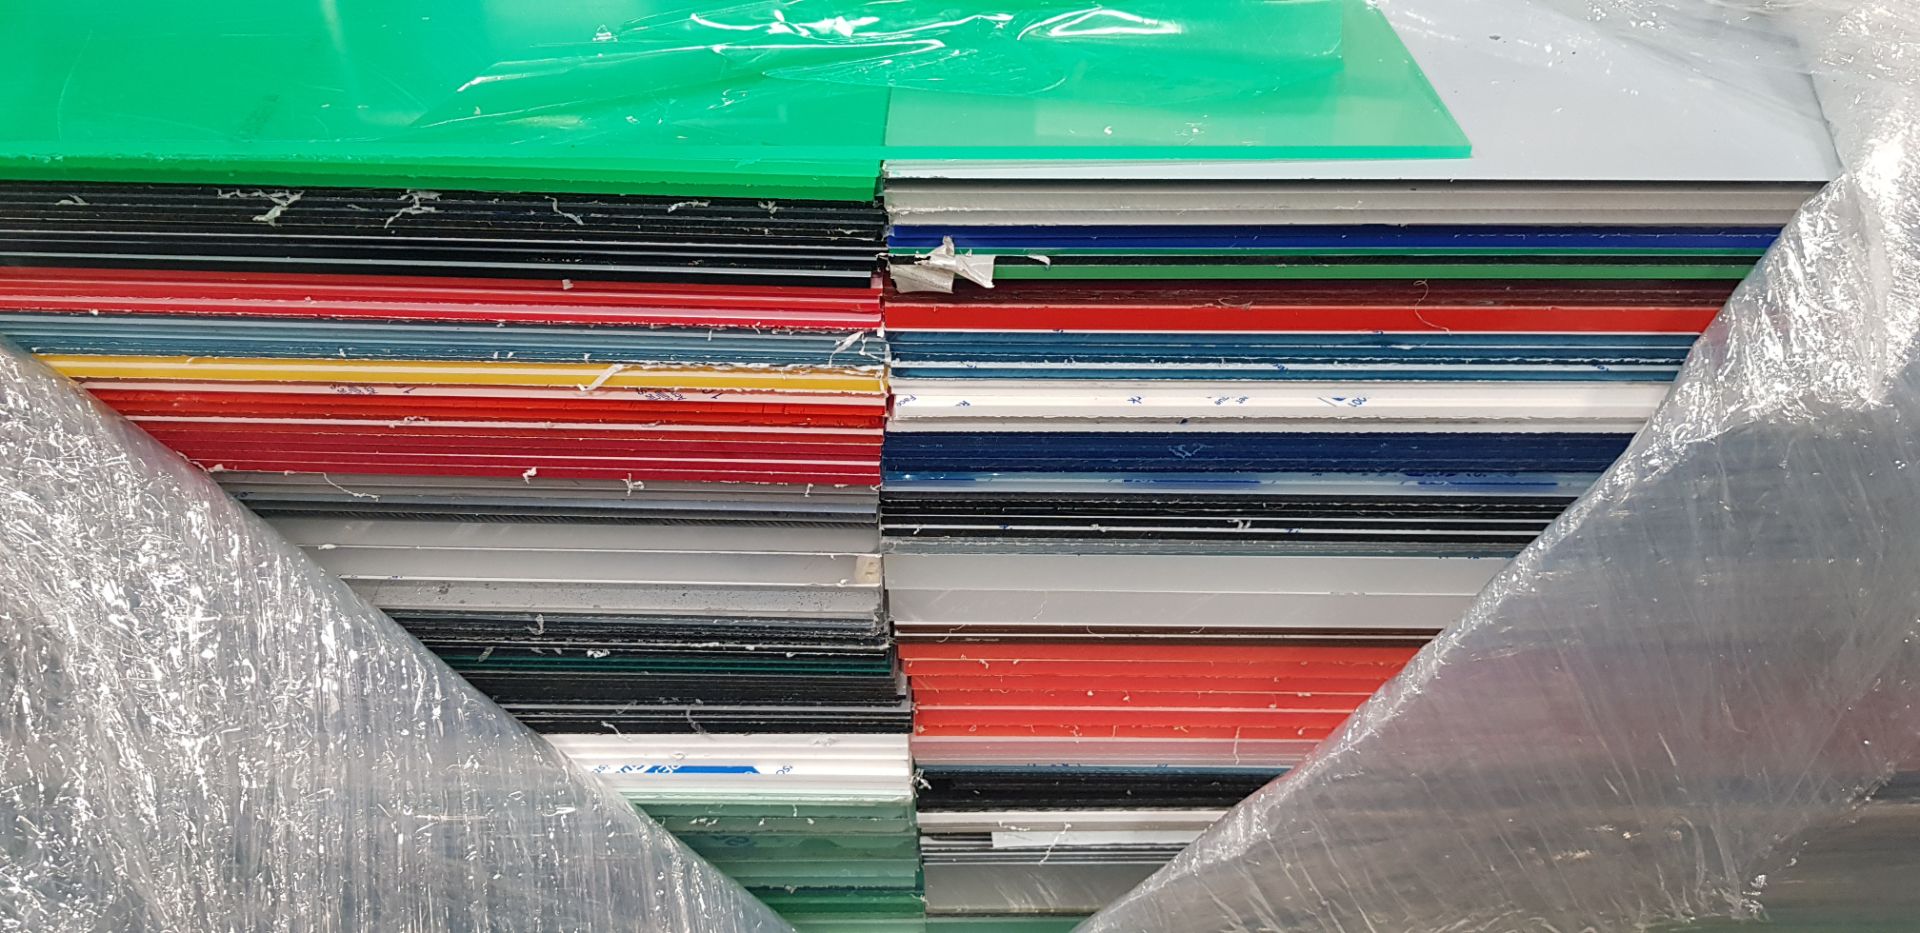 3/4 PALLET OF ACRYLIC PERSPEX CLEAR & OPAQUE 600MM SQUARE OFFCUTS IN VARIOUS COLOURS &